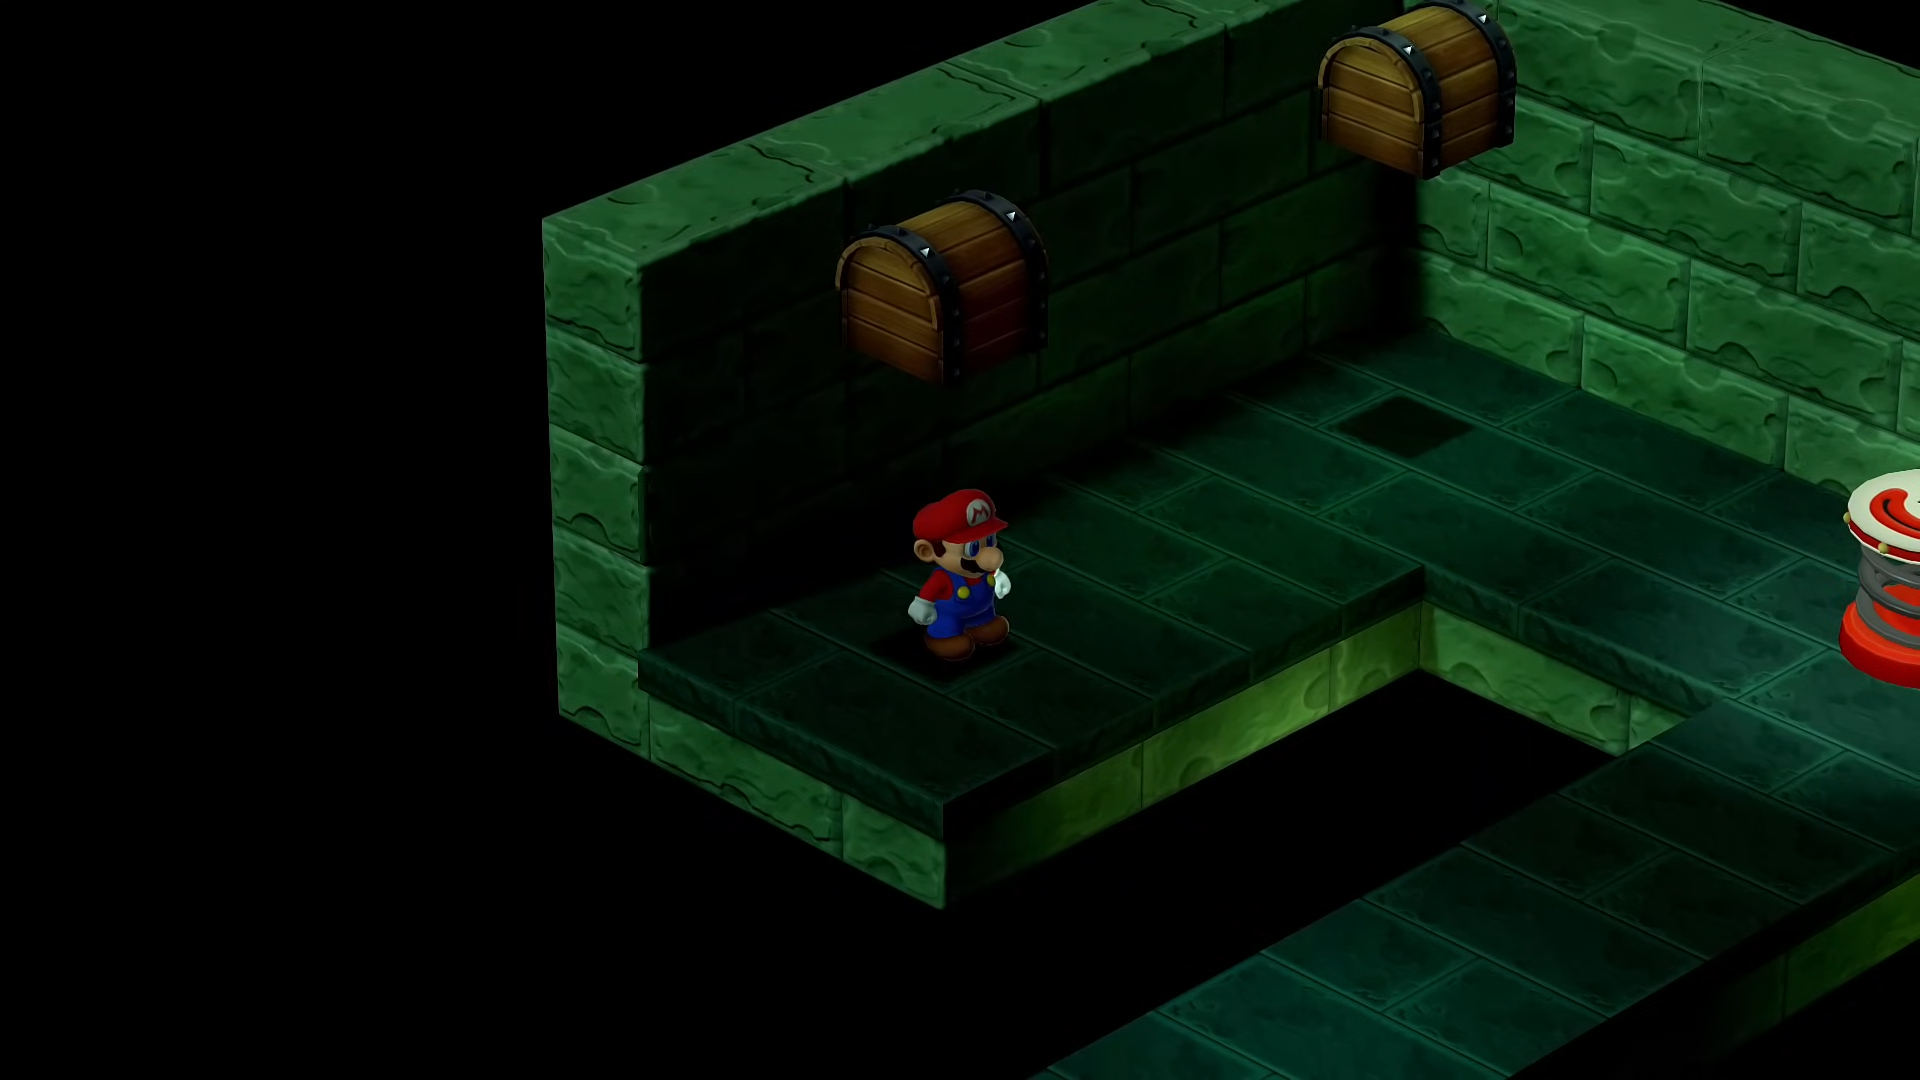 Mario in a green sewer.